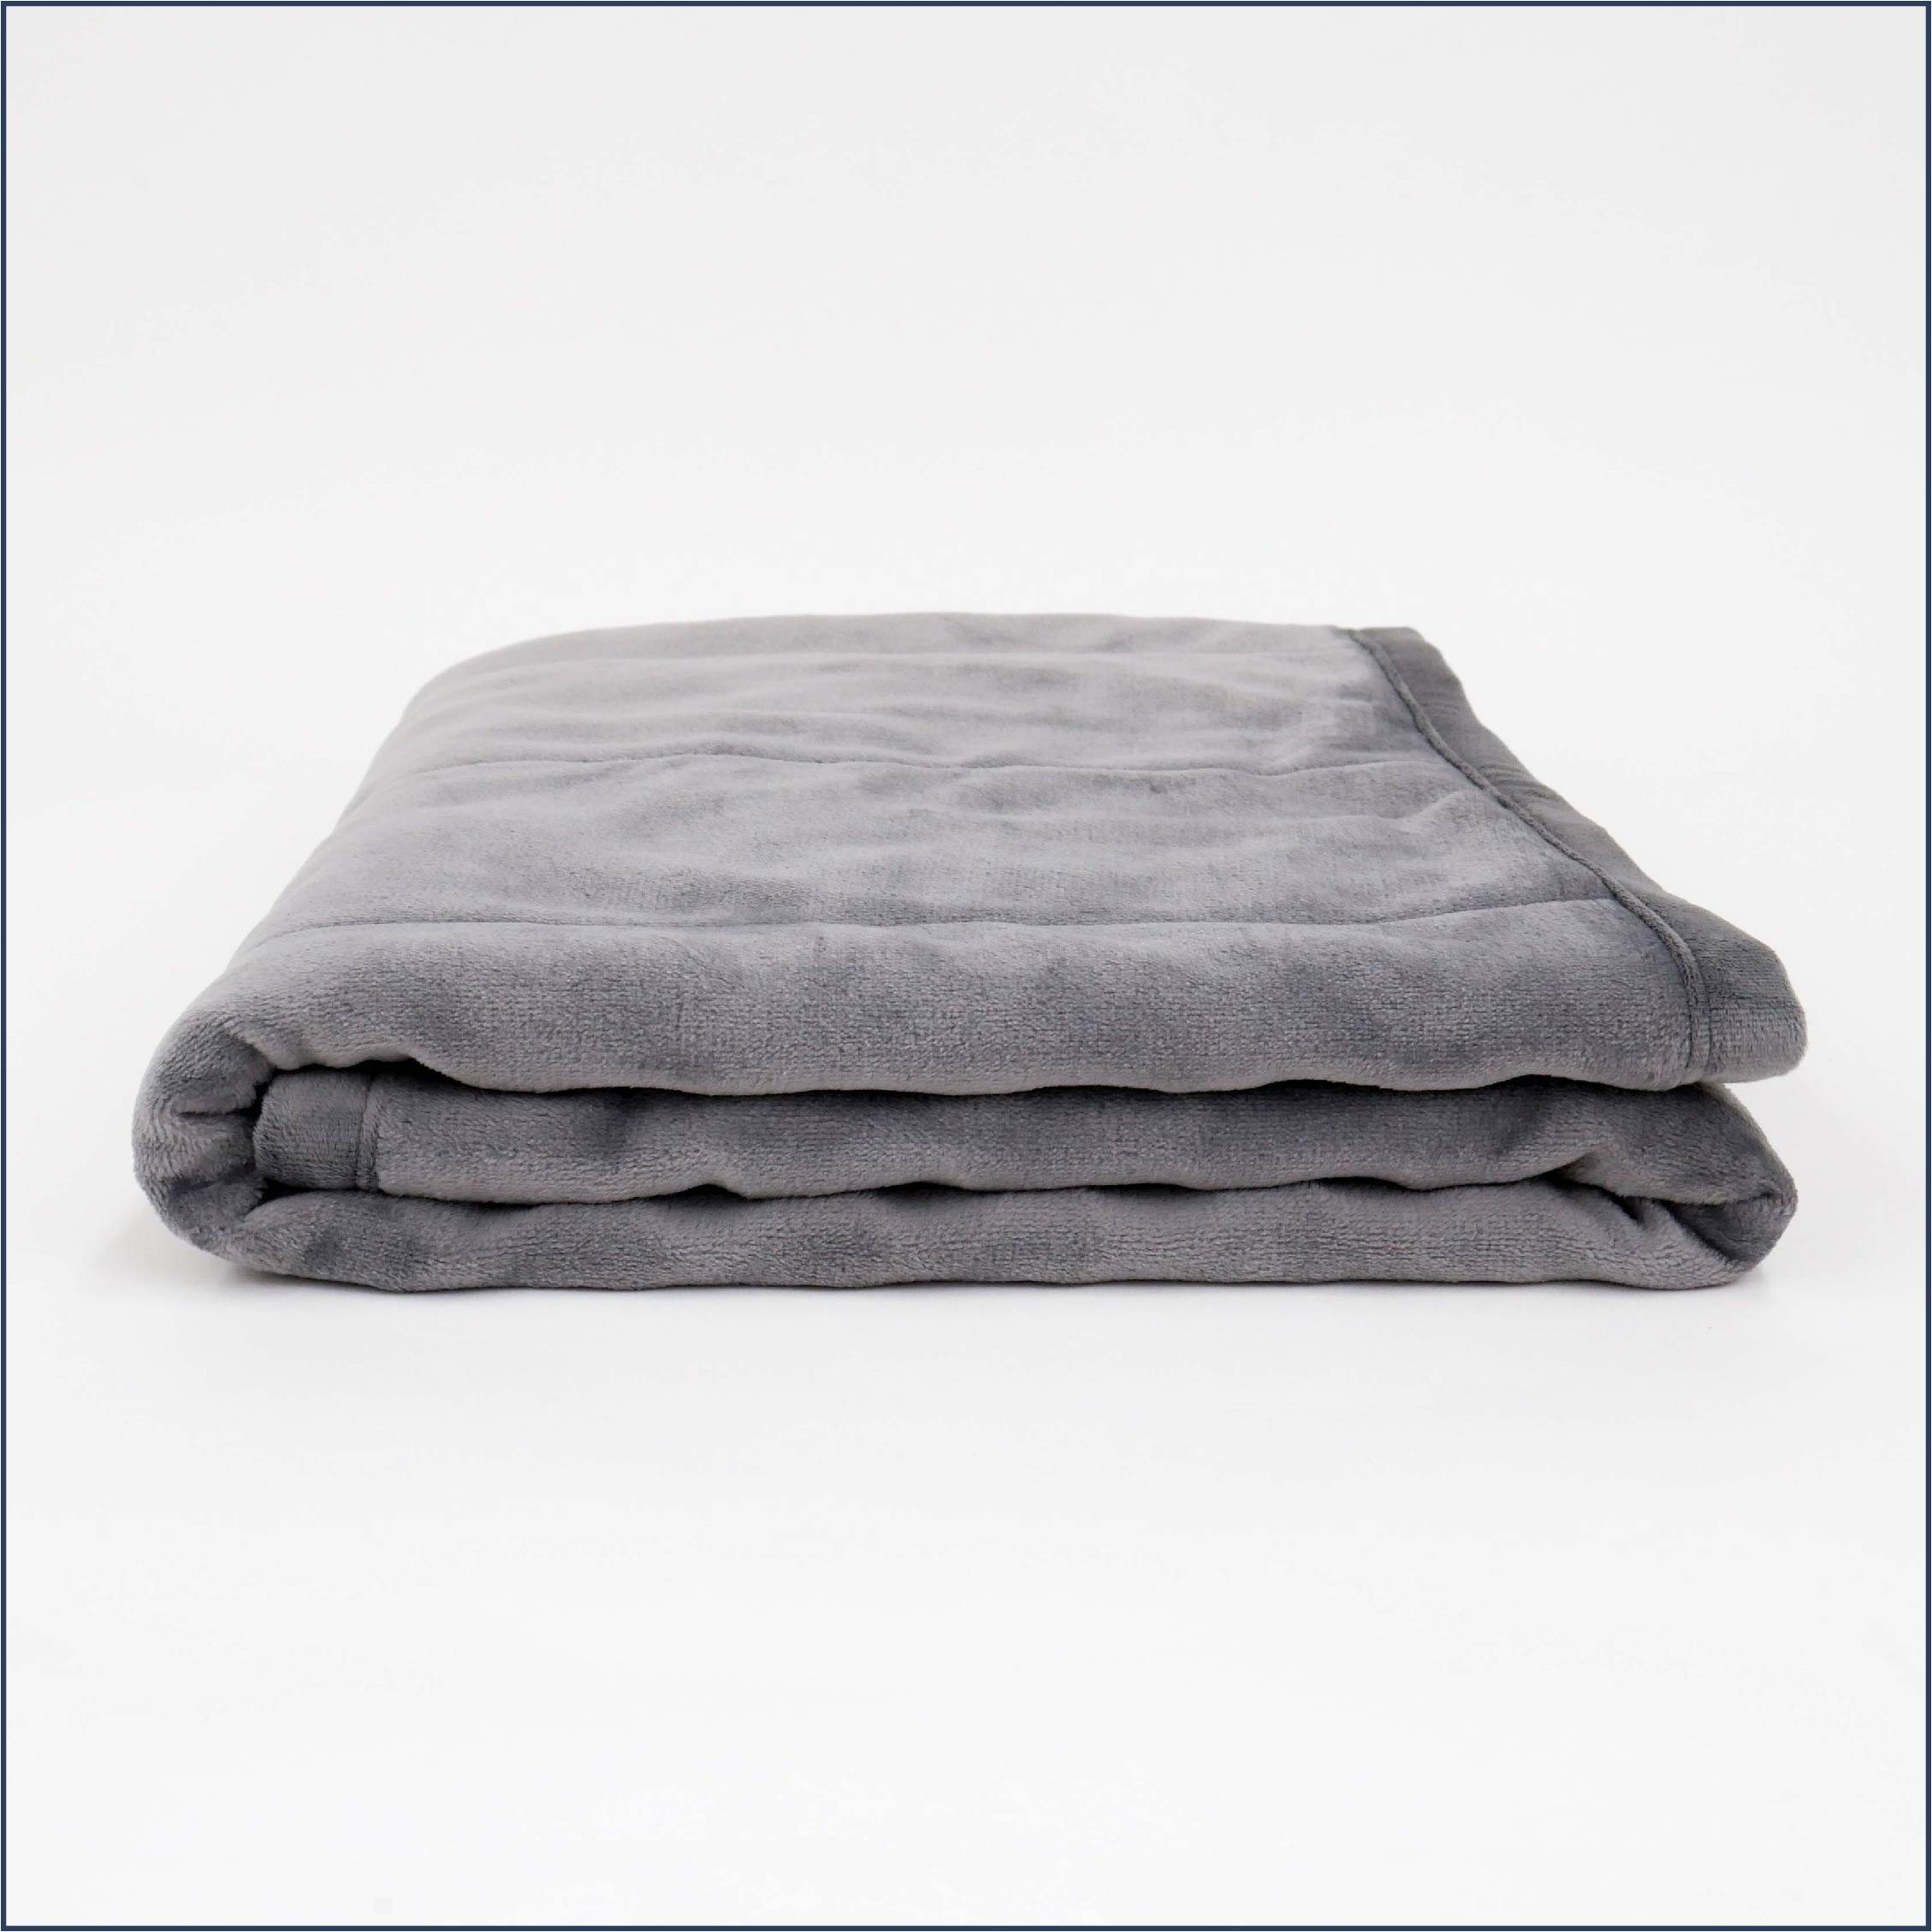 Tuc Kids Warm Weighted Blanket folded